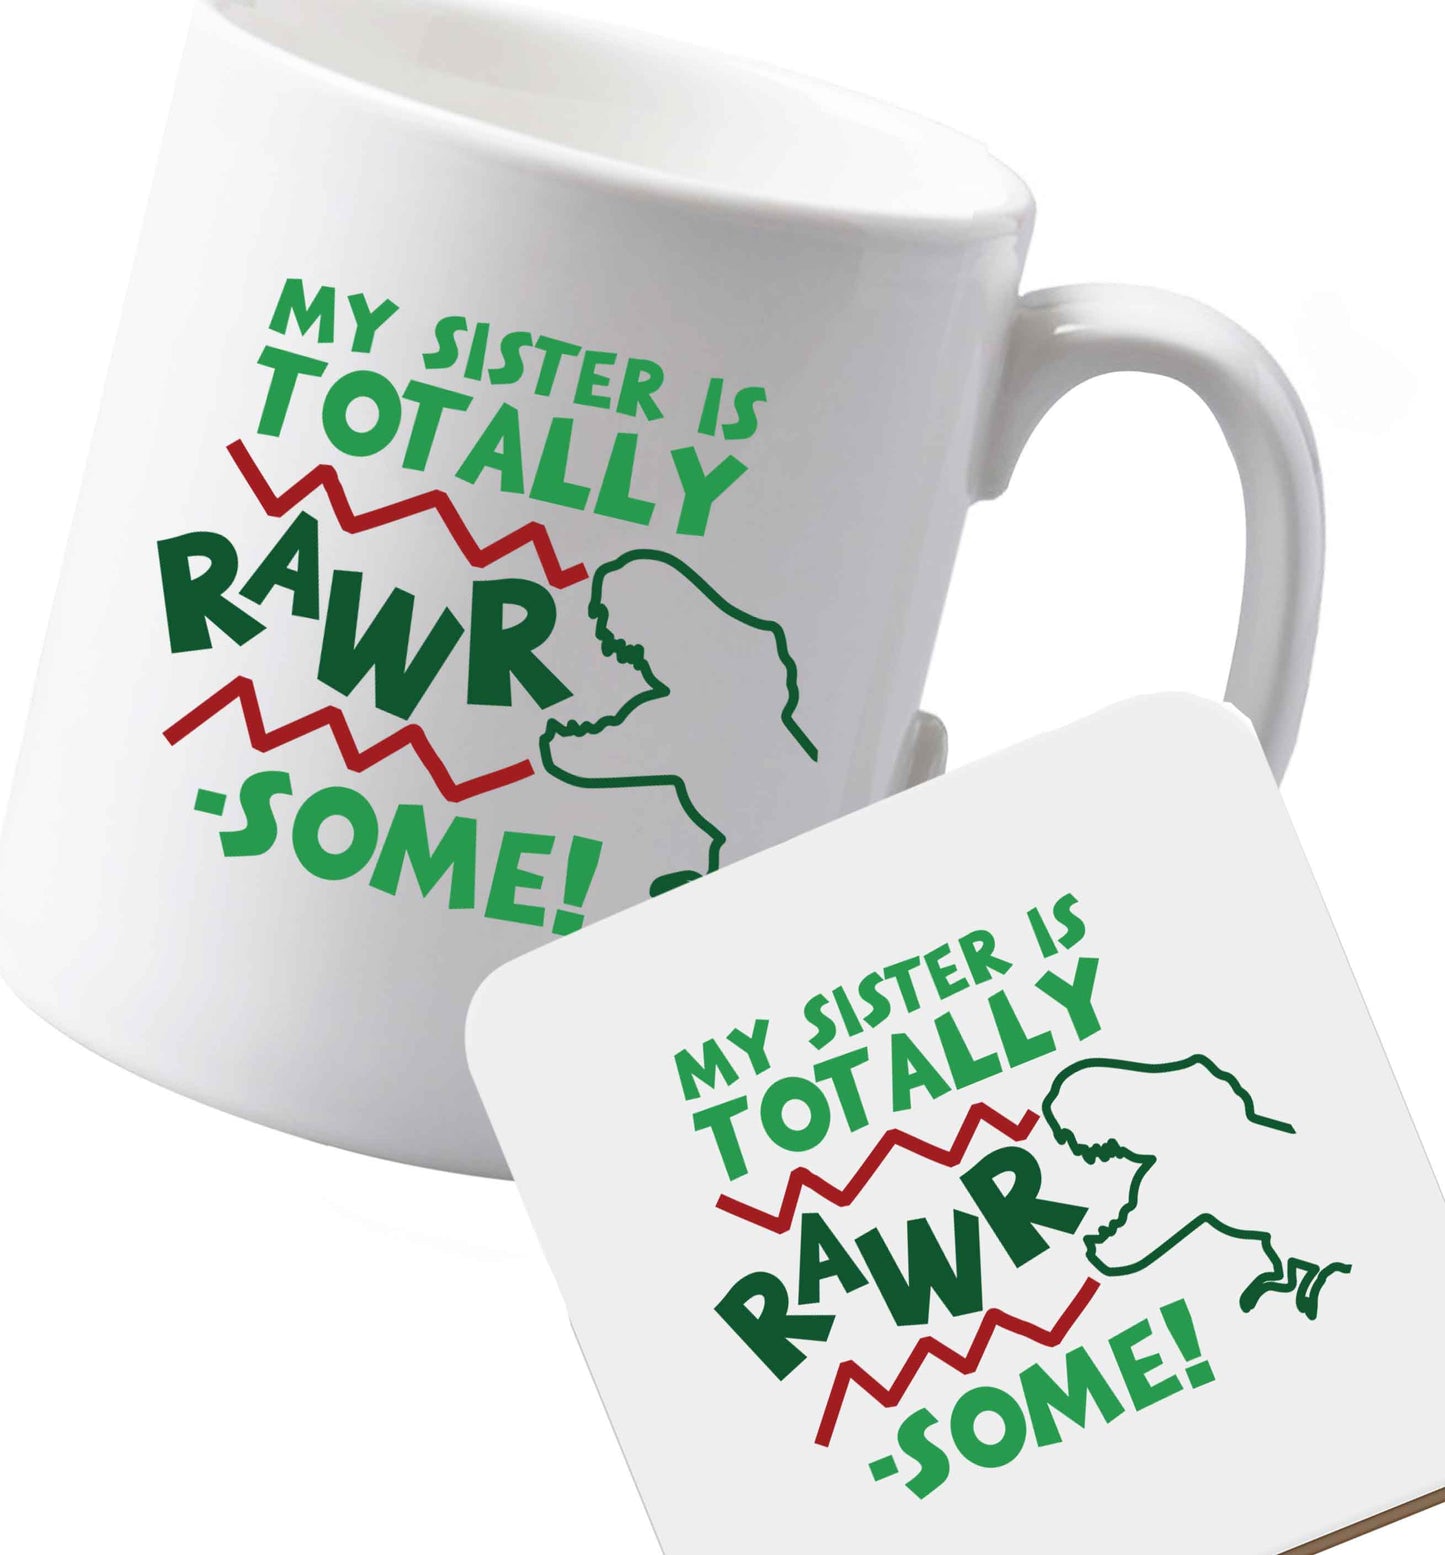 10 oz Ceramic mug and coaster My sister is totally rawrsome both sides